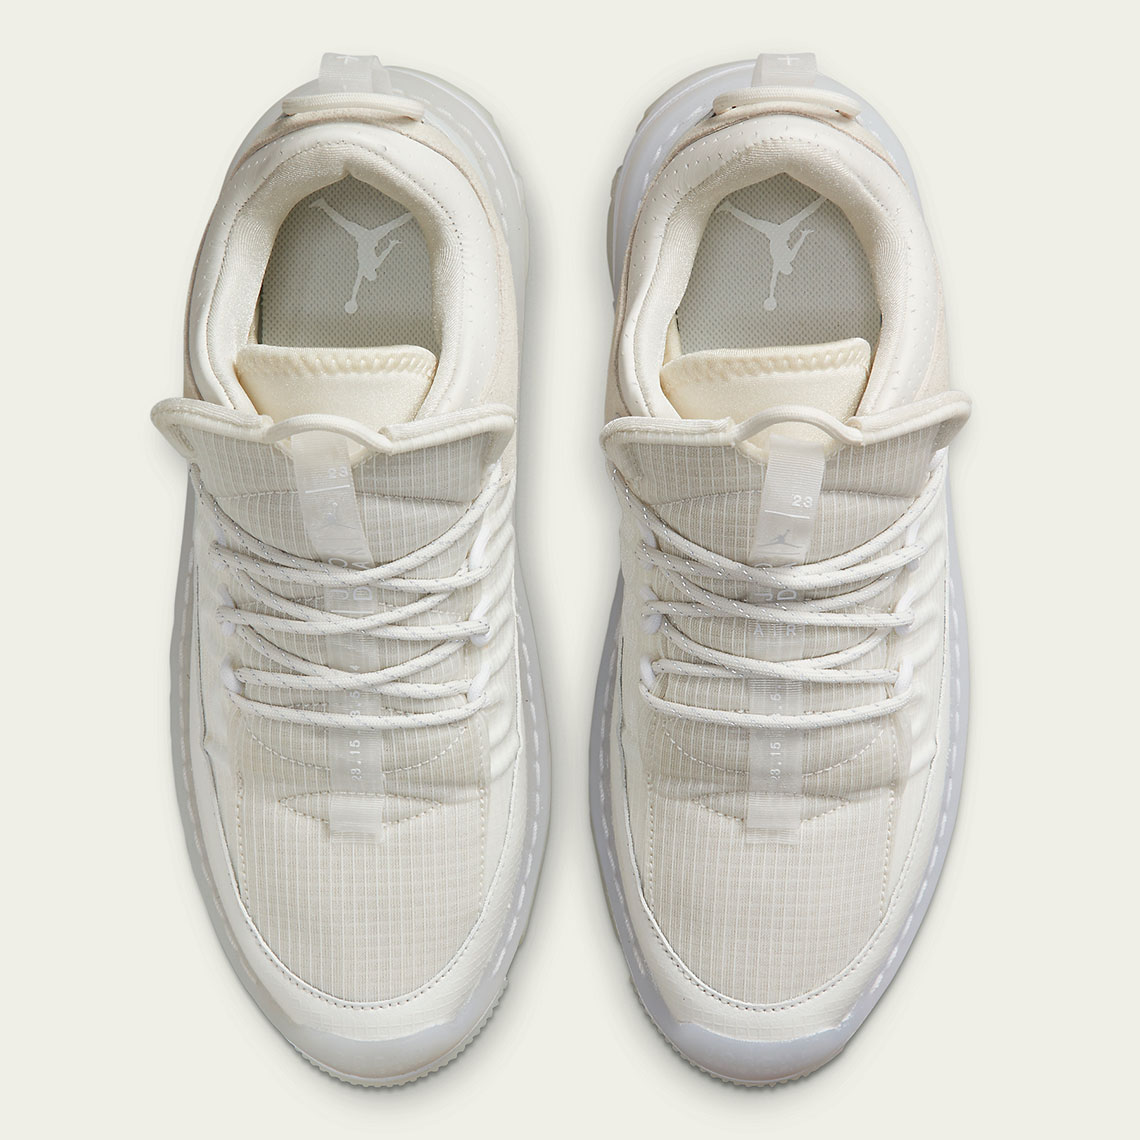 The lateral side of the Air Jordan 11 CMFT Low Wmns Sail Ct4539 100 6